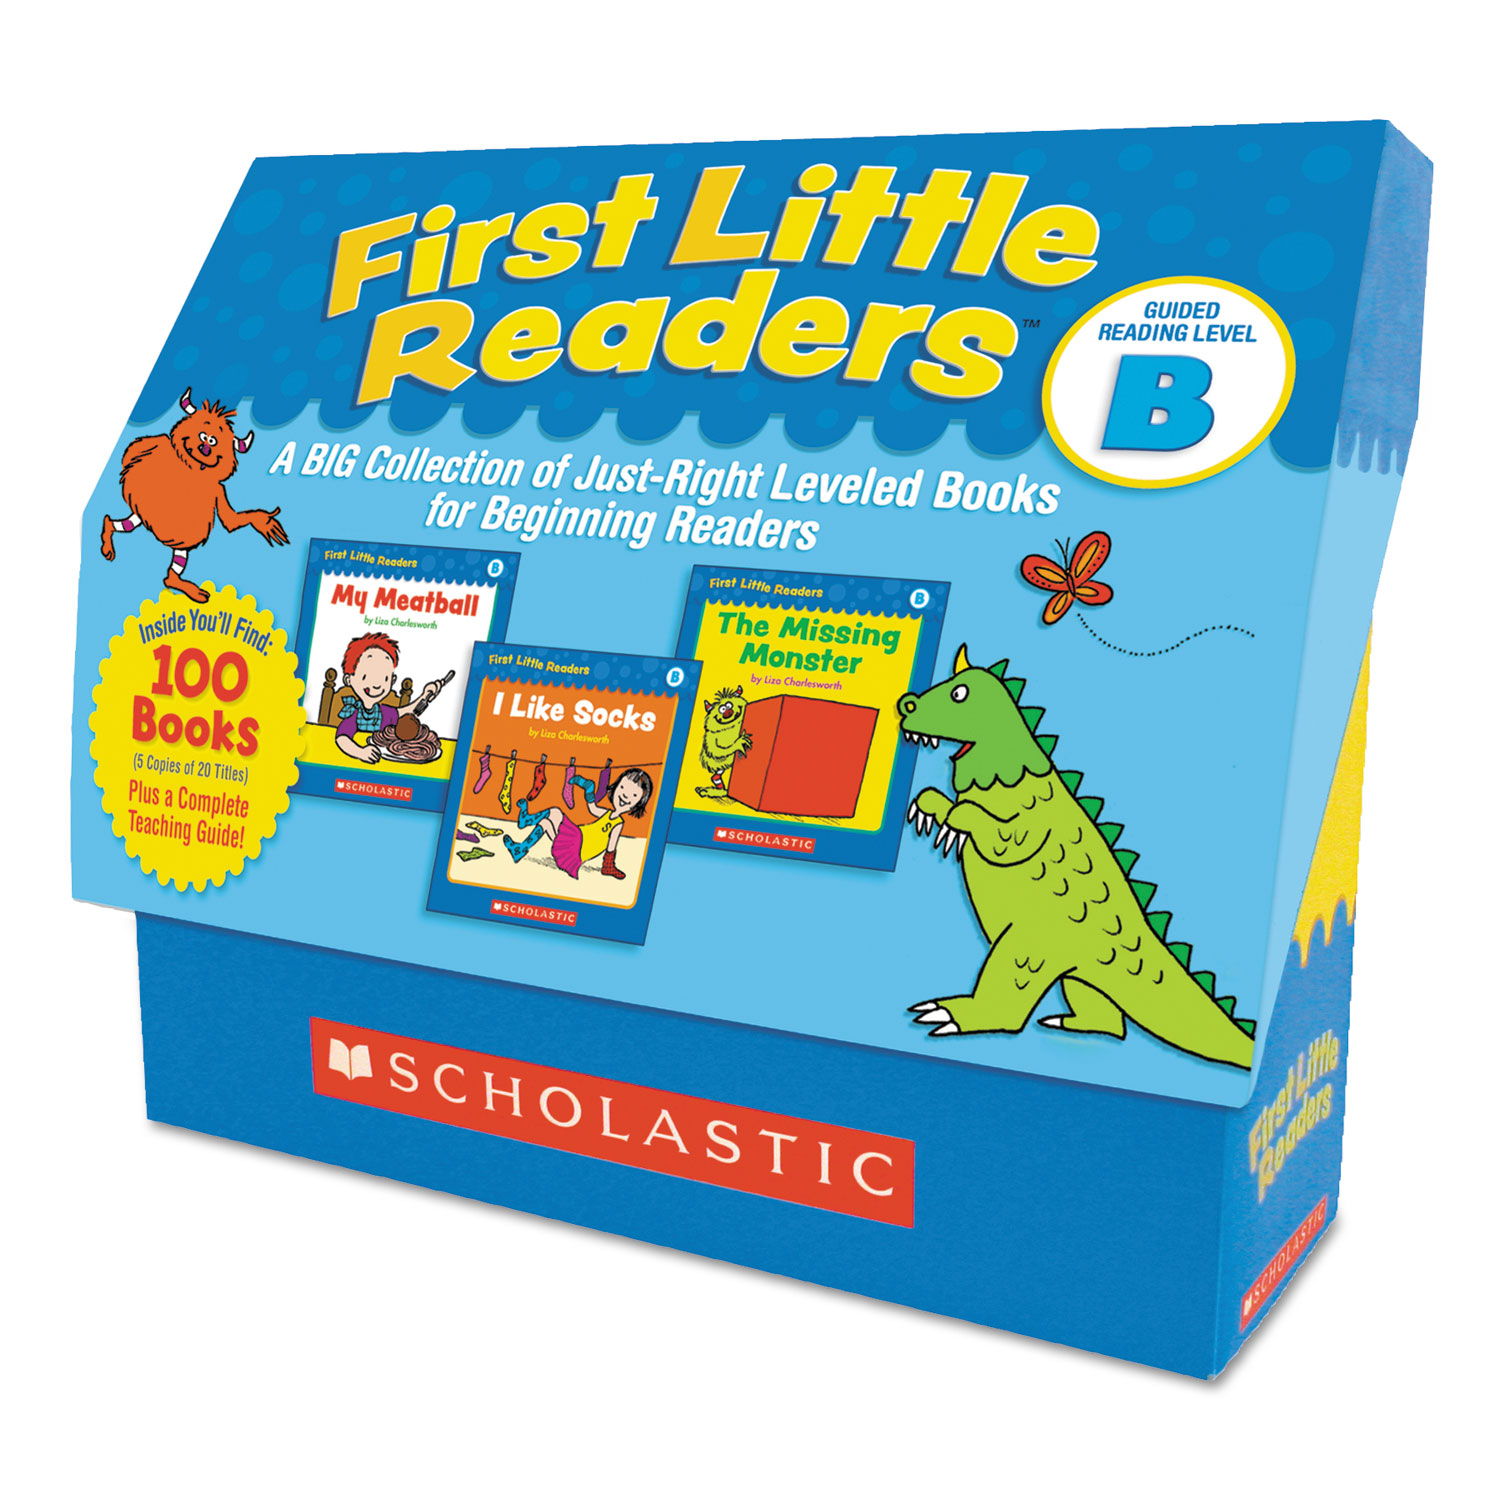  Scholastic 9780545223027 First Little Readers, Reading, Grades Pre K-2, 8 Pages/Book, 20 Books, Level B (SHS522302) 